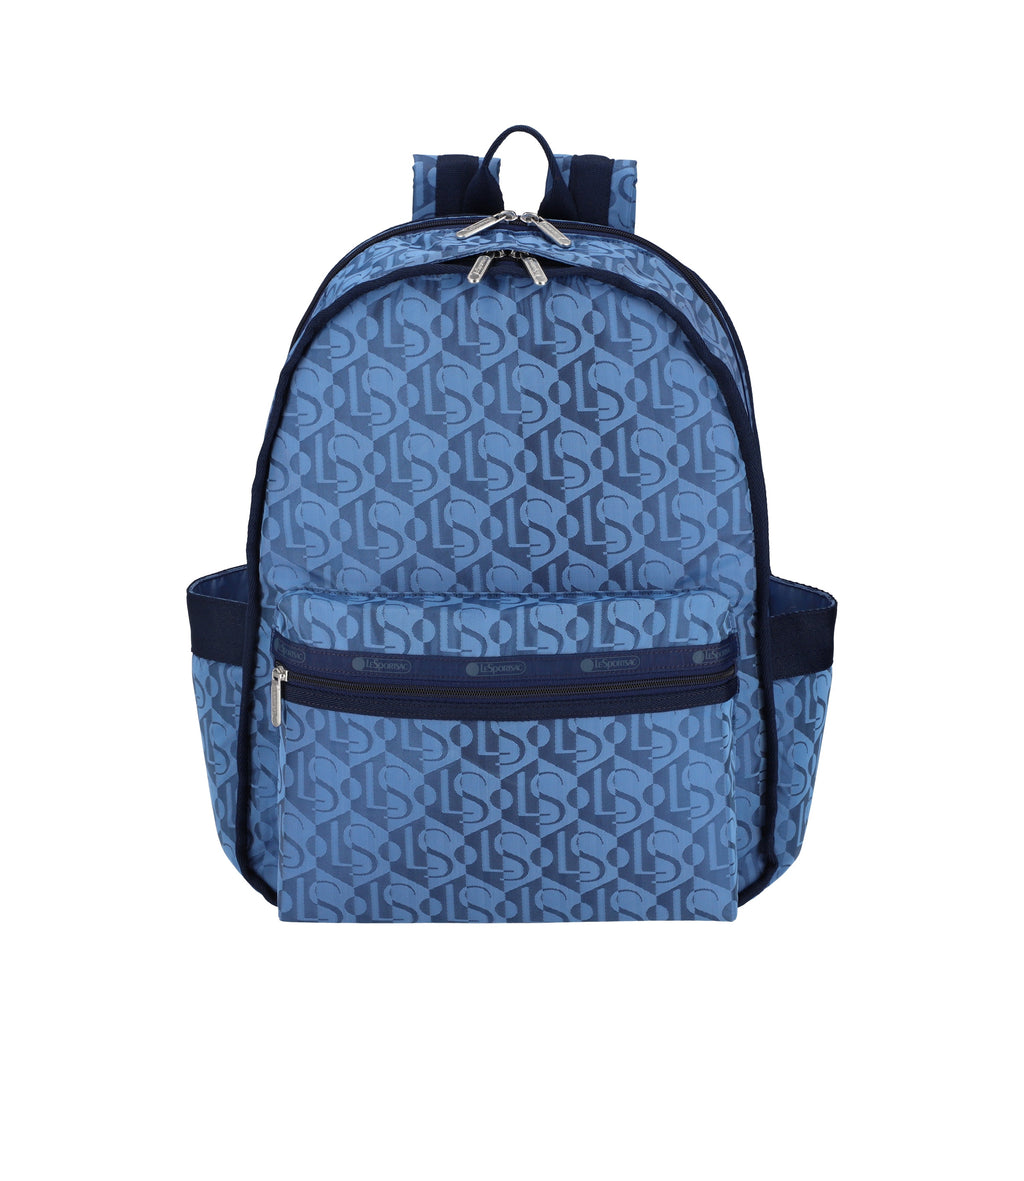 Route Backpack - 23818844241968